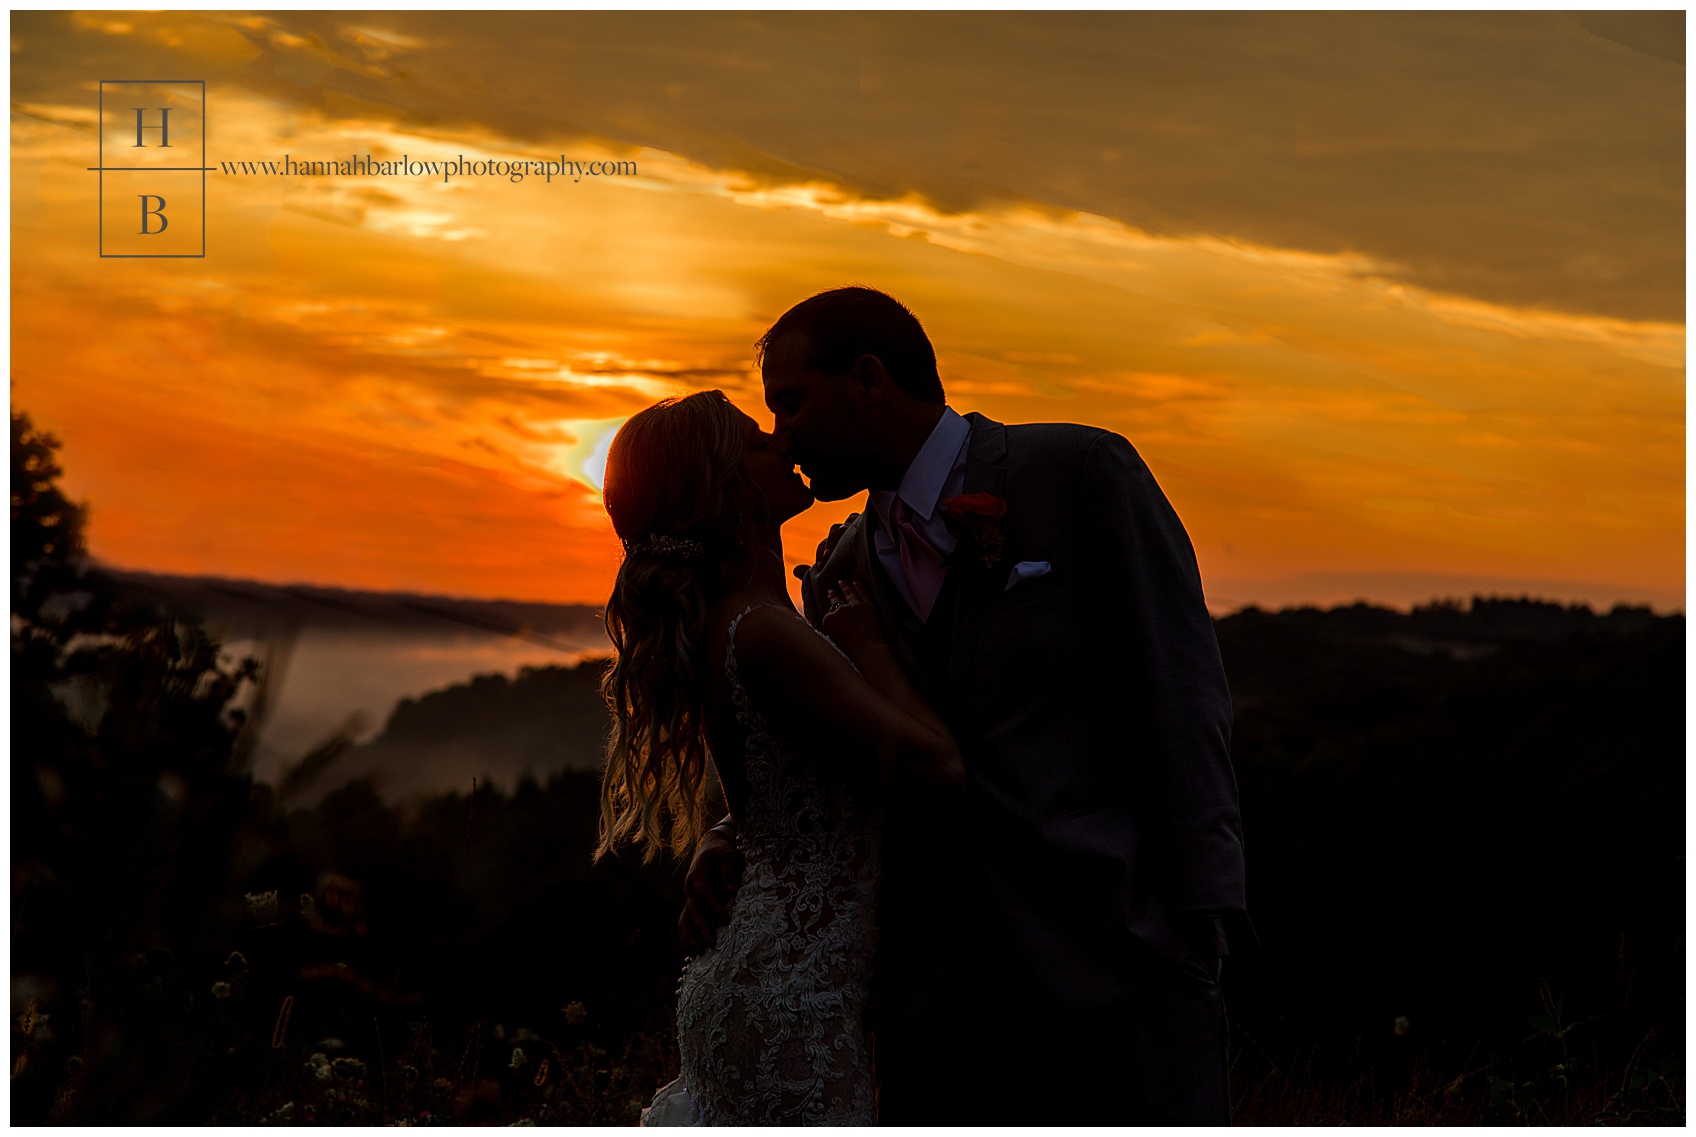 Bride and Groom Sunset Silhouette Photos